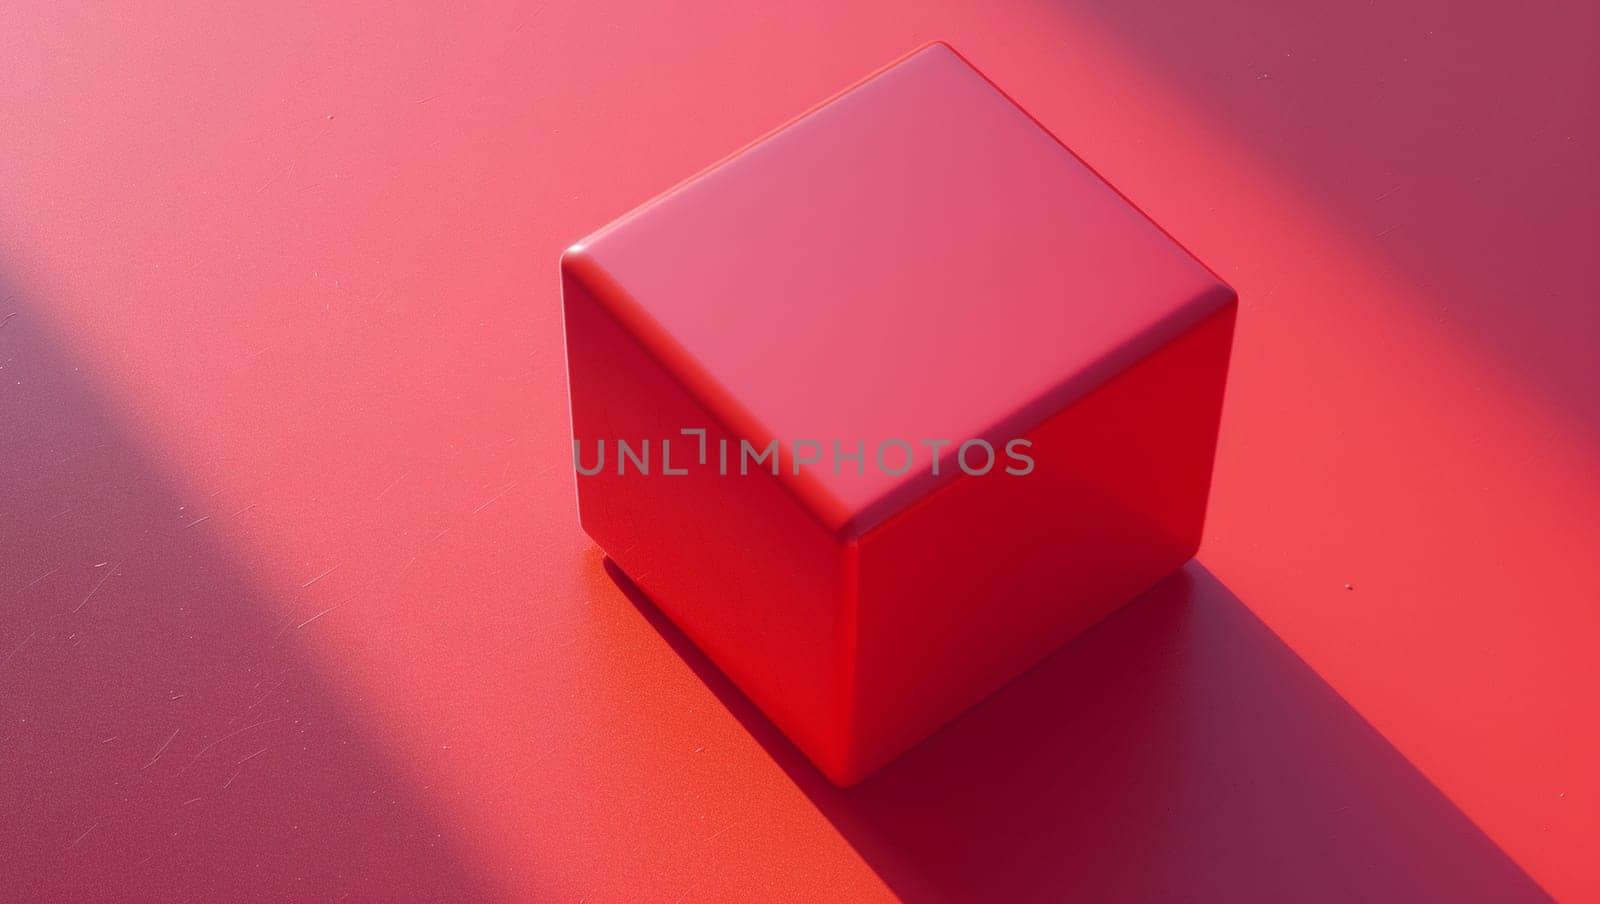 Red Cube 3D illustration Red Cube 3D illustration, render. Simple cube on a red background.tion, render. Simple cube on a red background. High quality photo